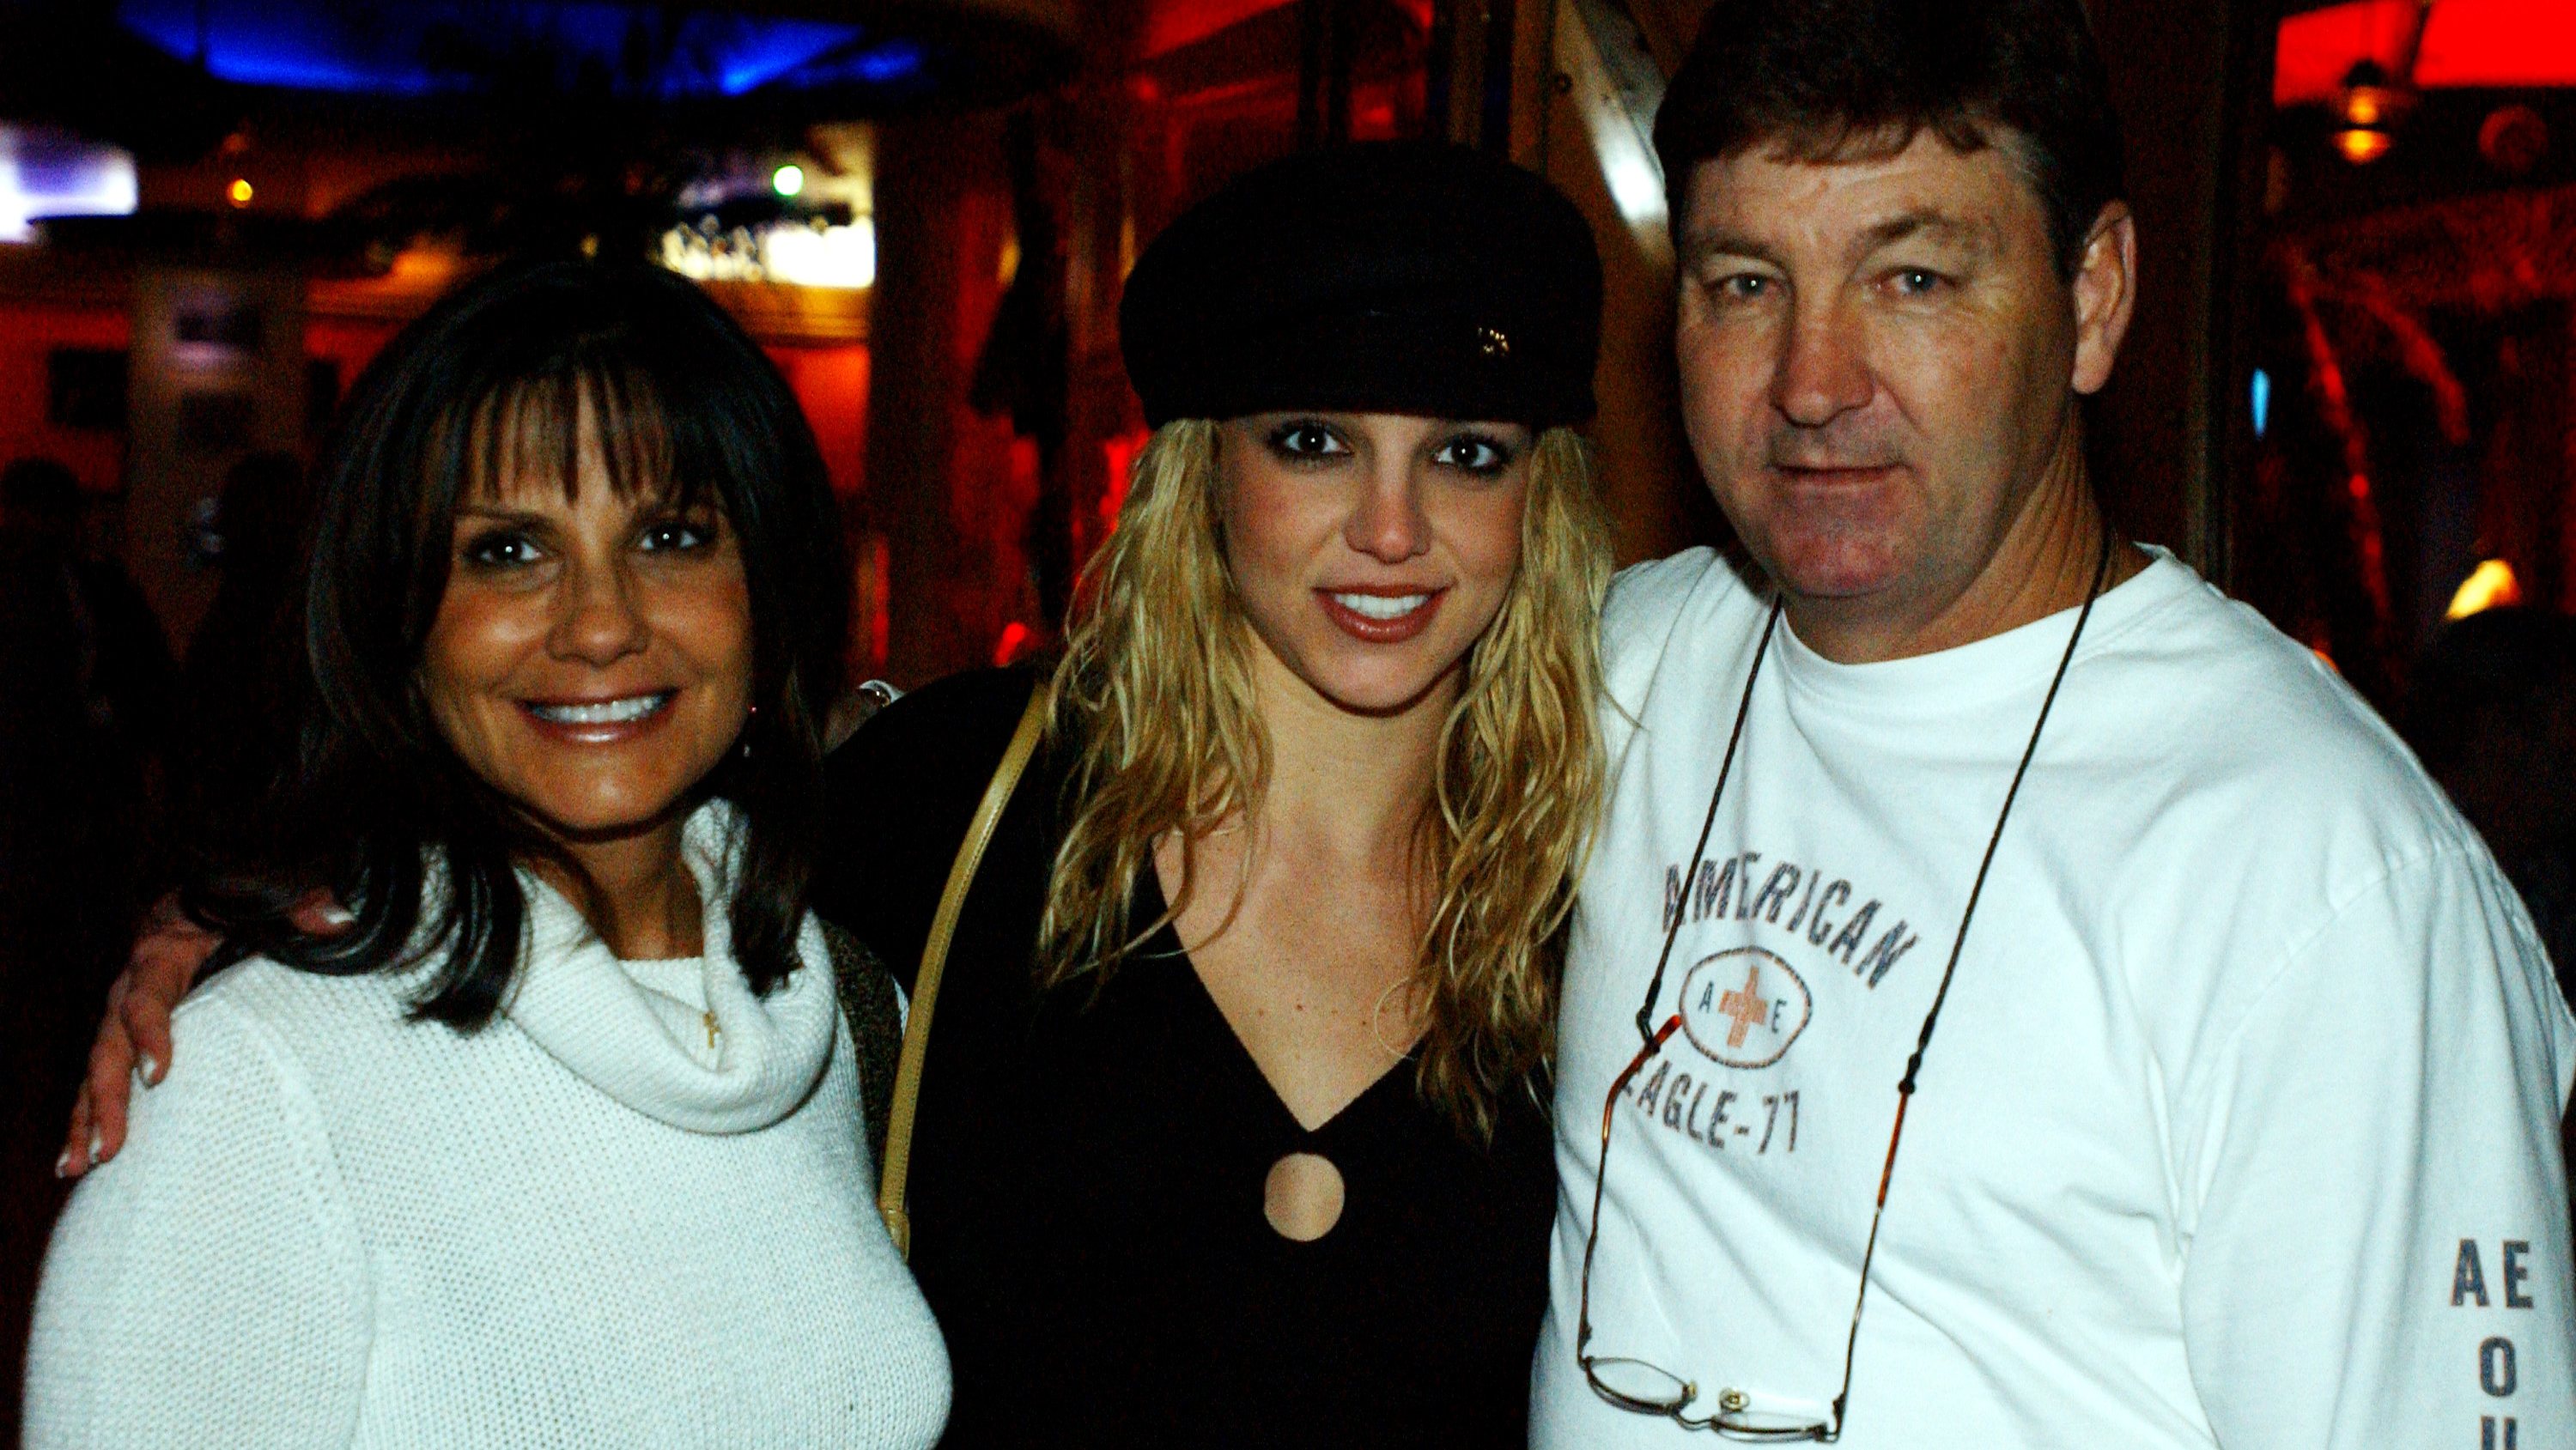 Britney Spears at Planet Hollywood, Las Vegas Party